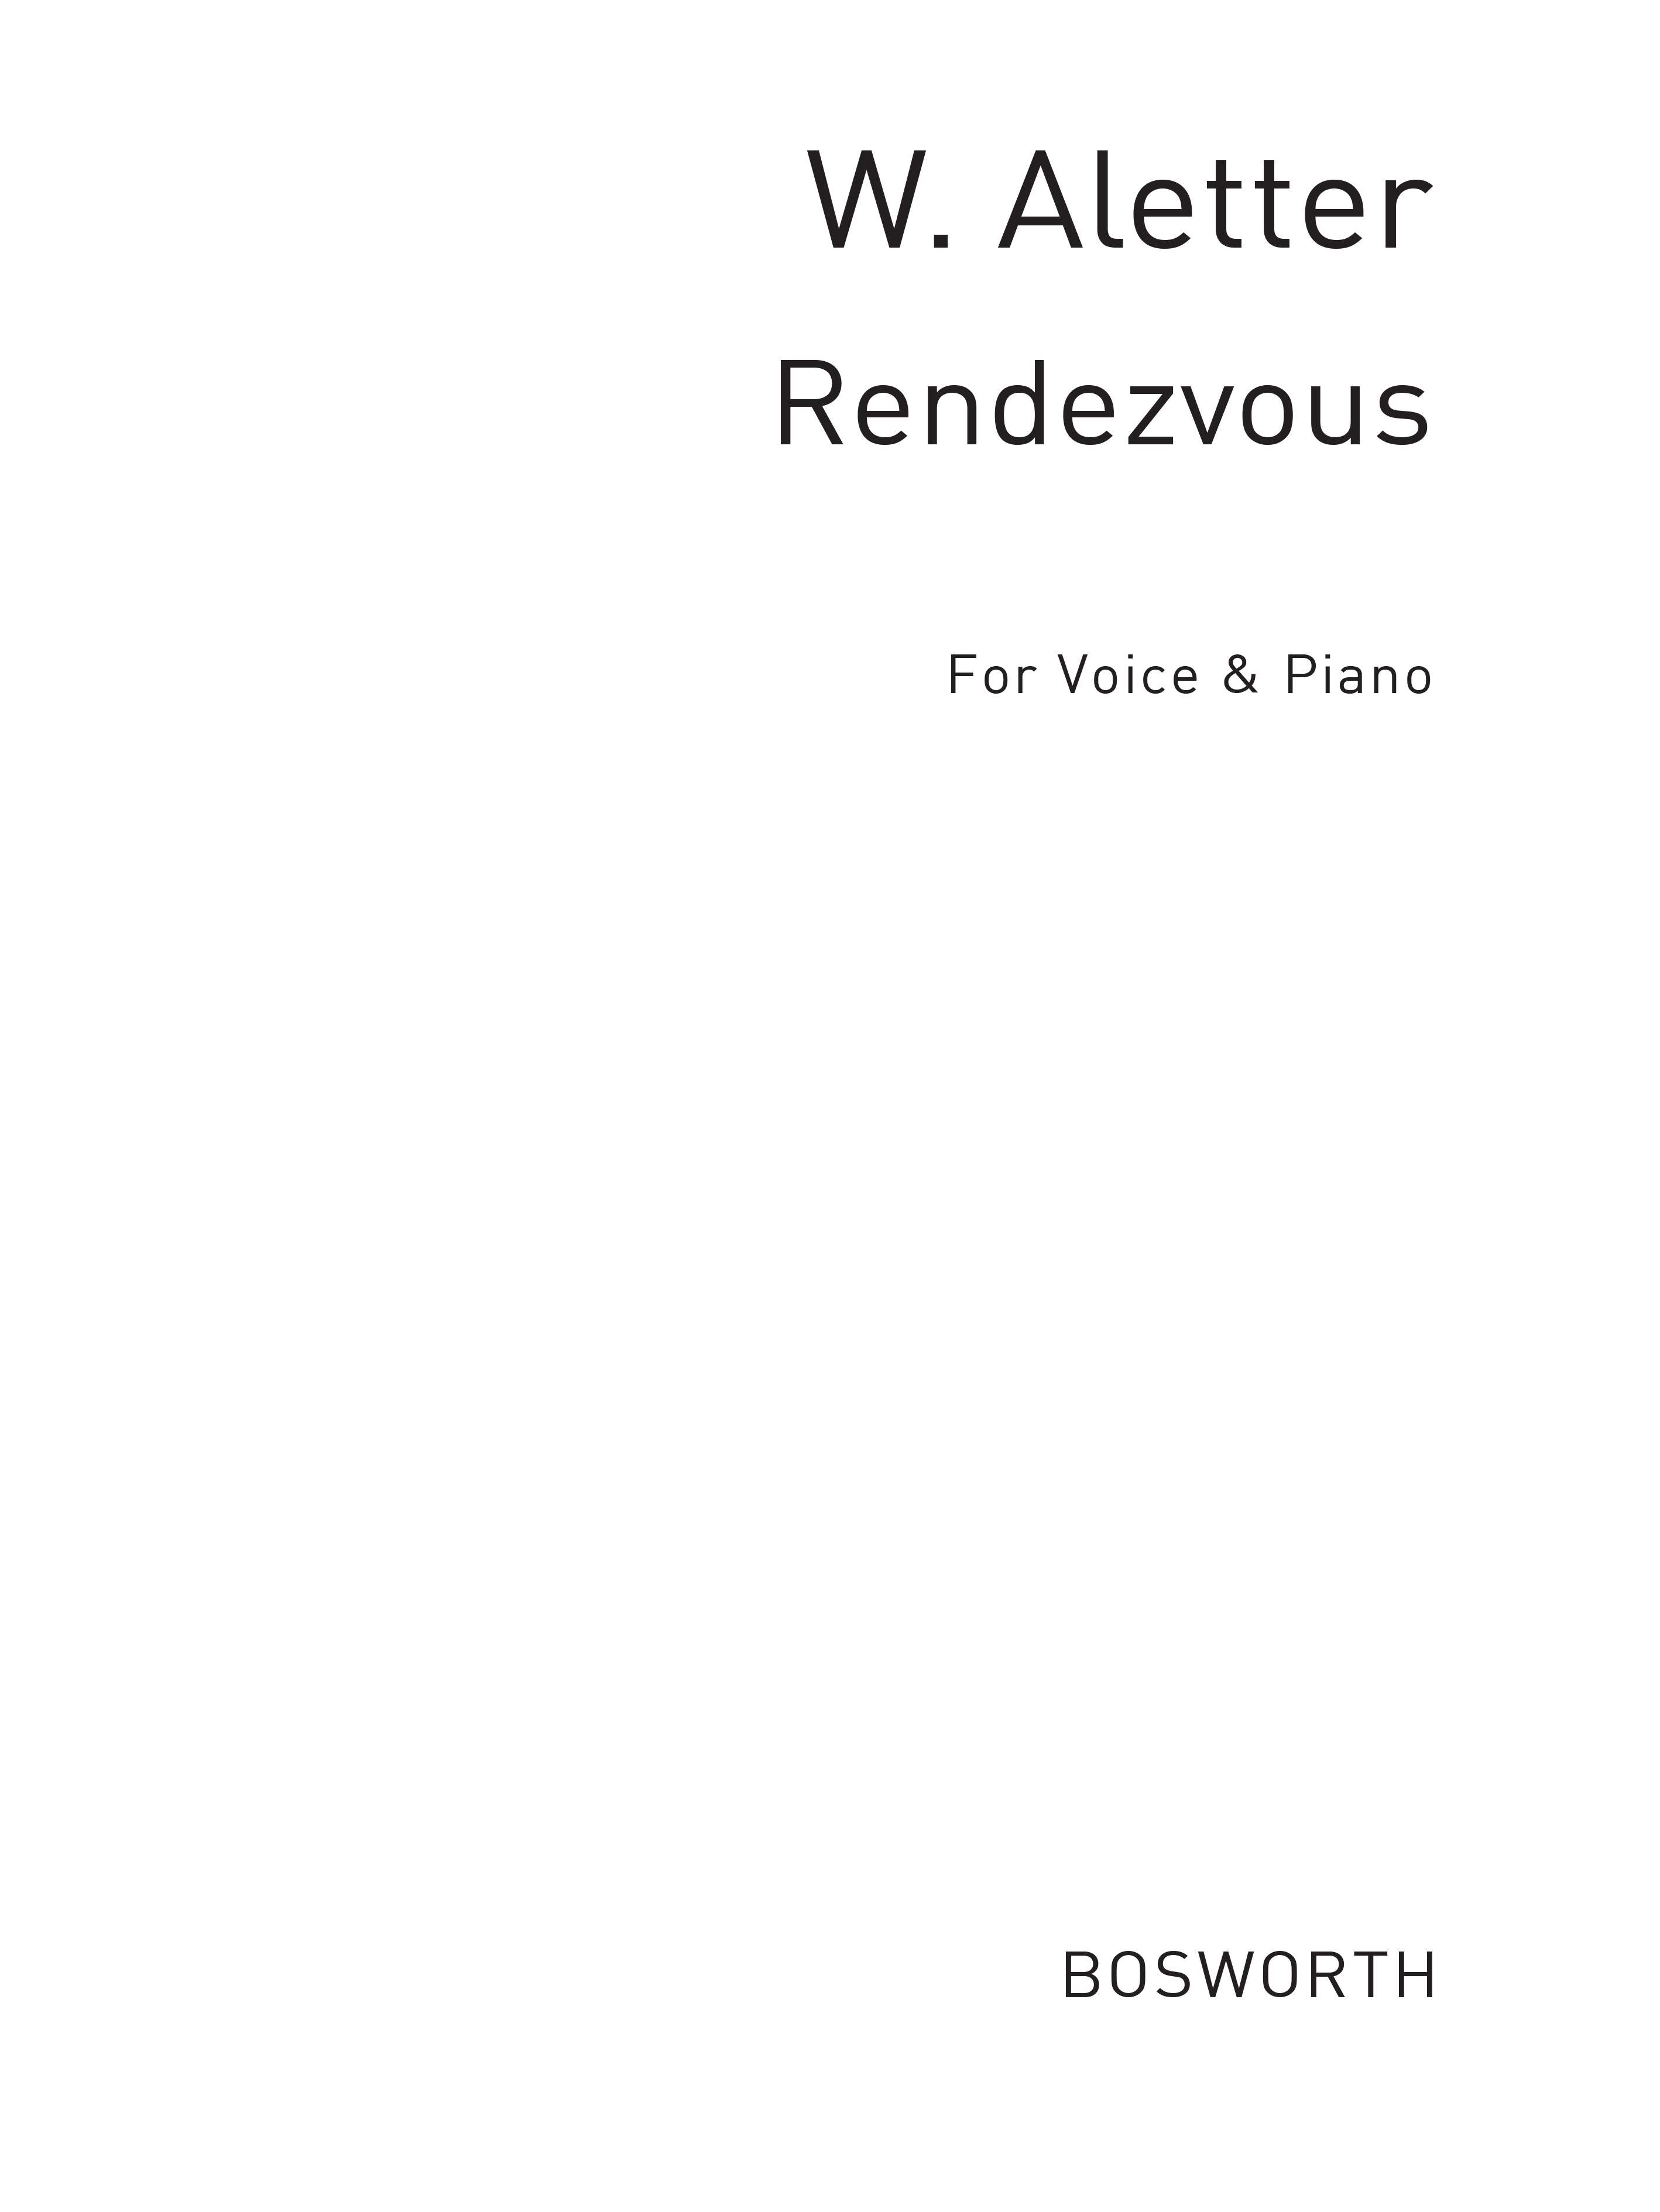 W. Aletter: Rendezvous For Voice and Piano